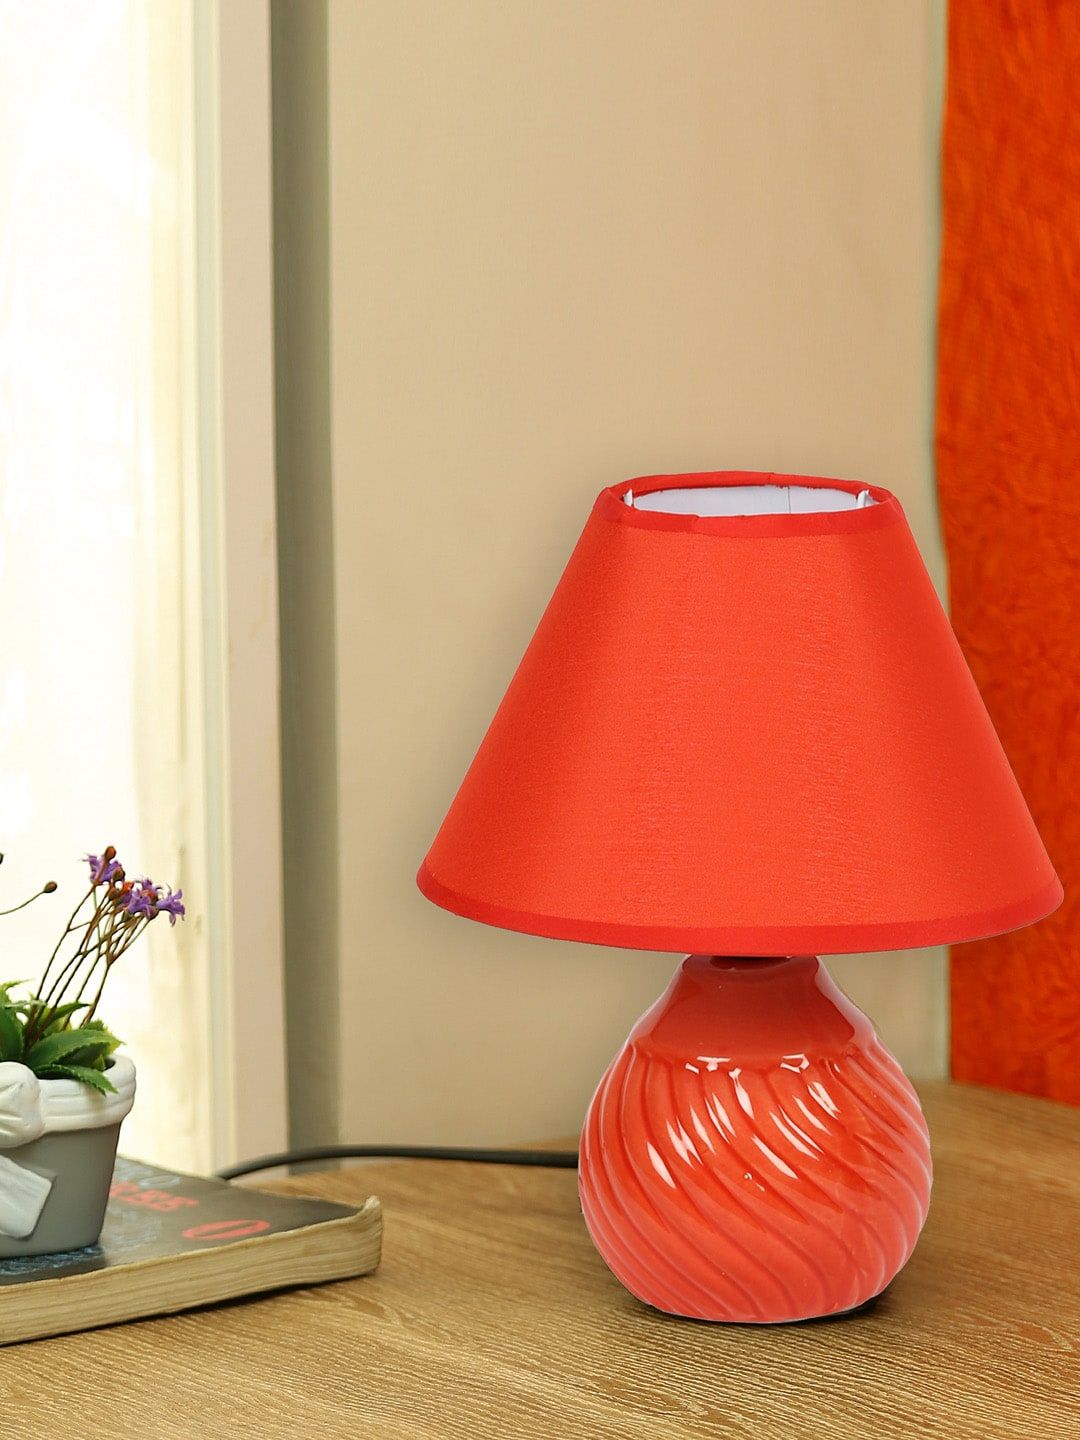 Aapno Rajasthan Red Vintage Style Polished Ceramic Round Table Lamp With Shade Price in India